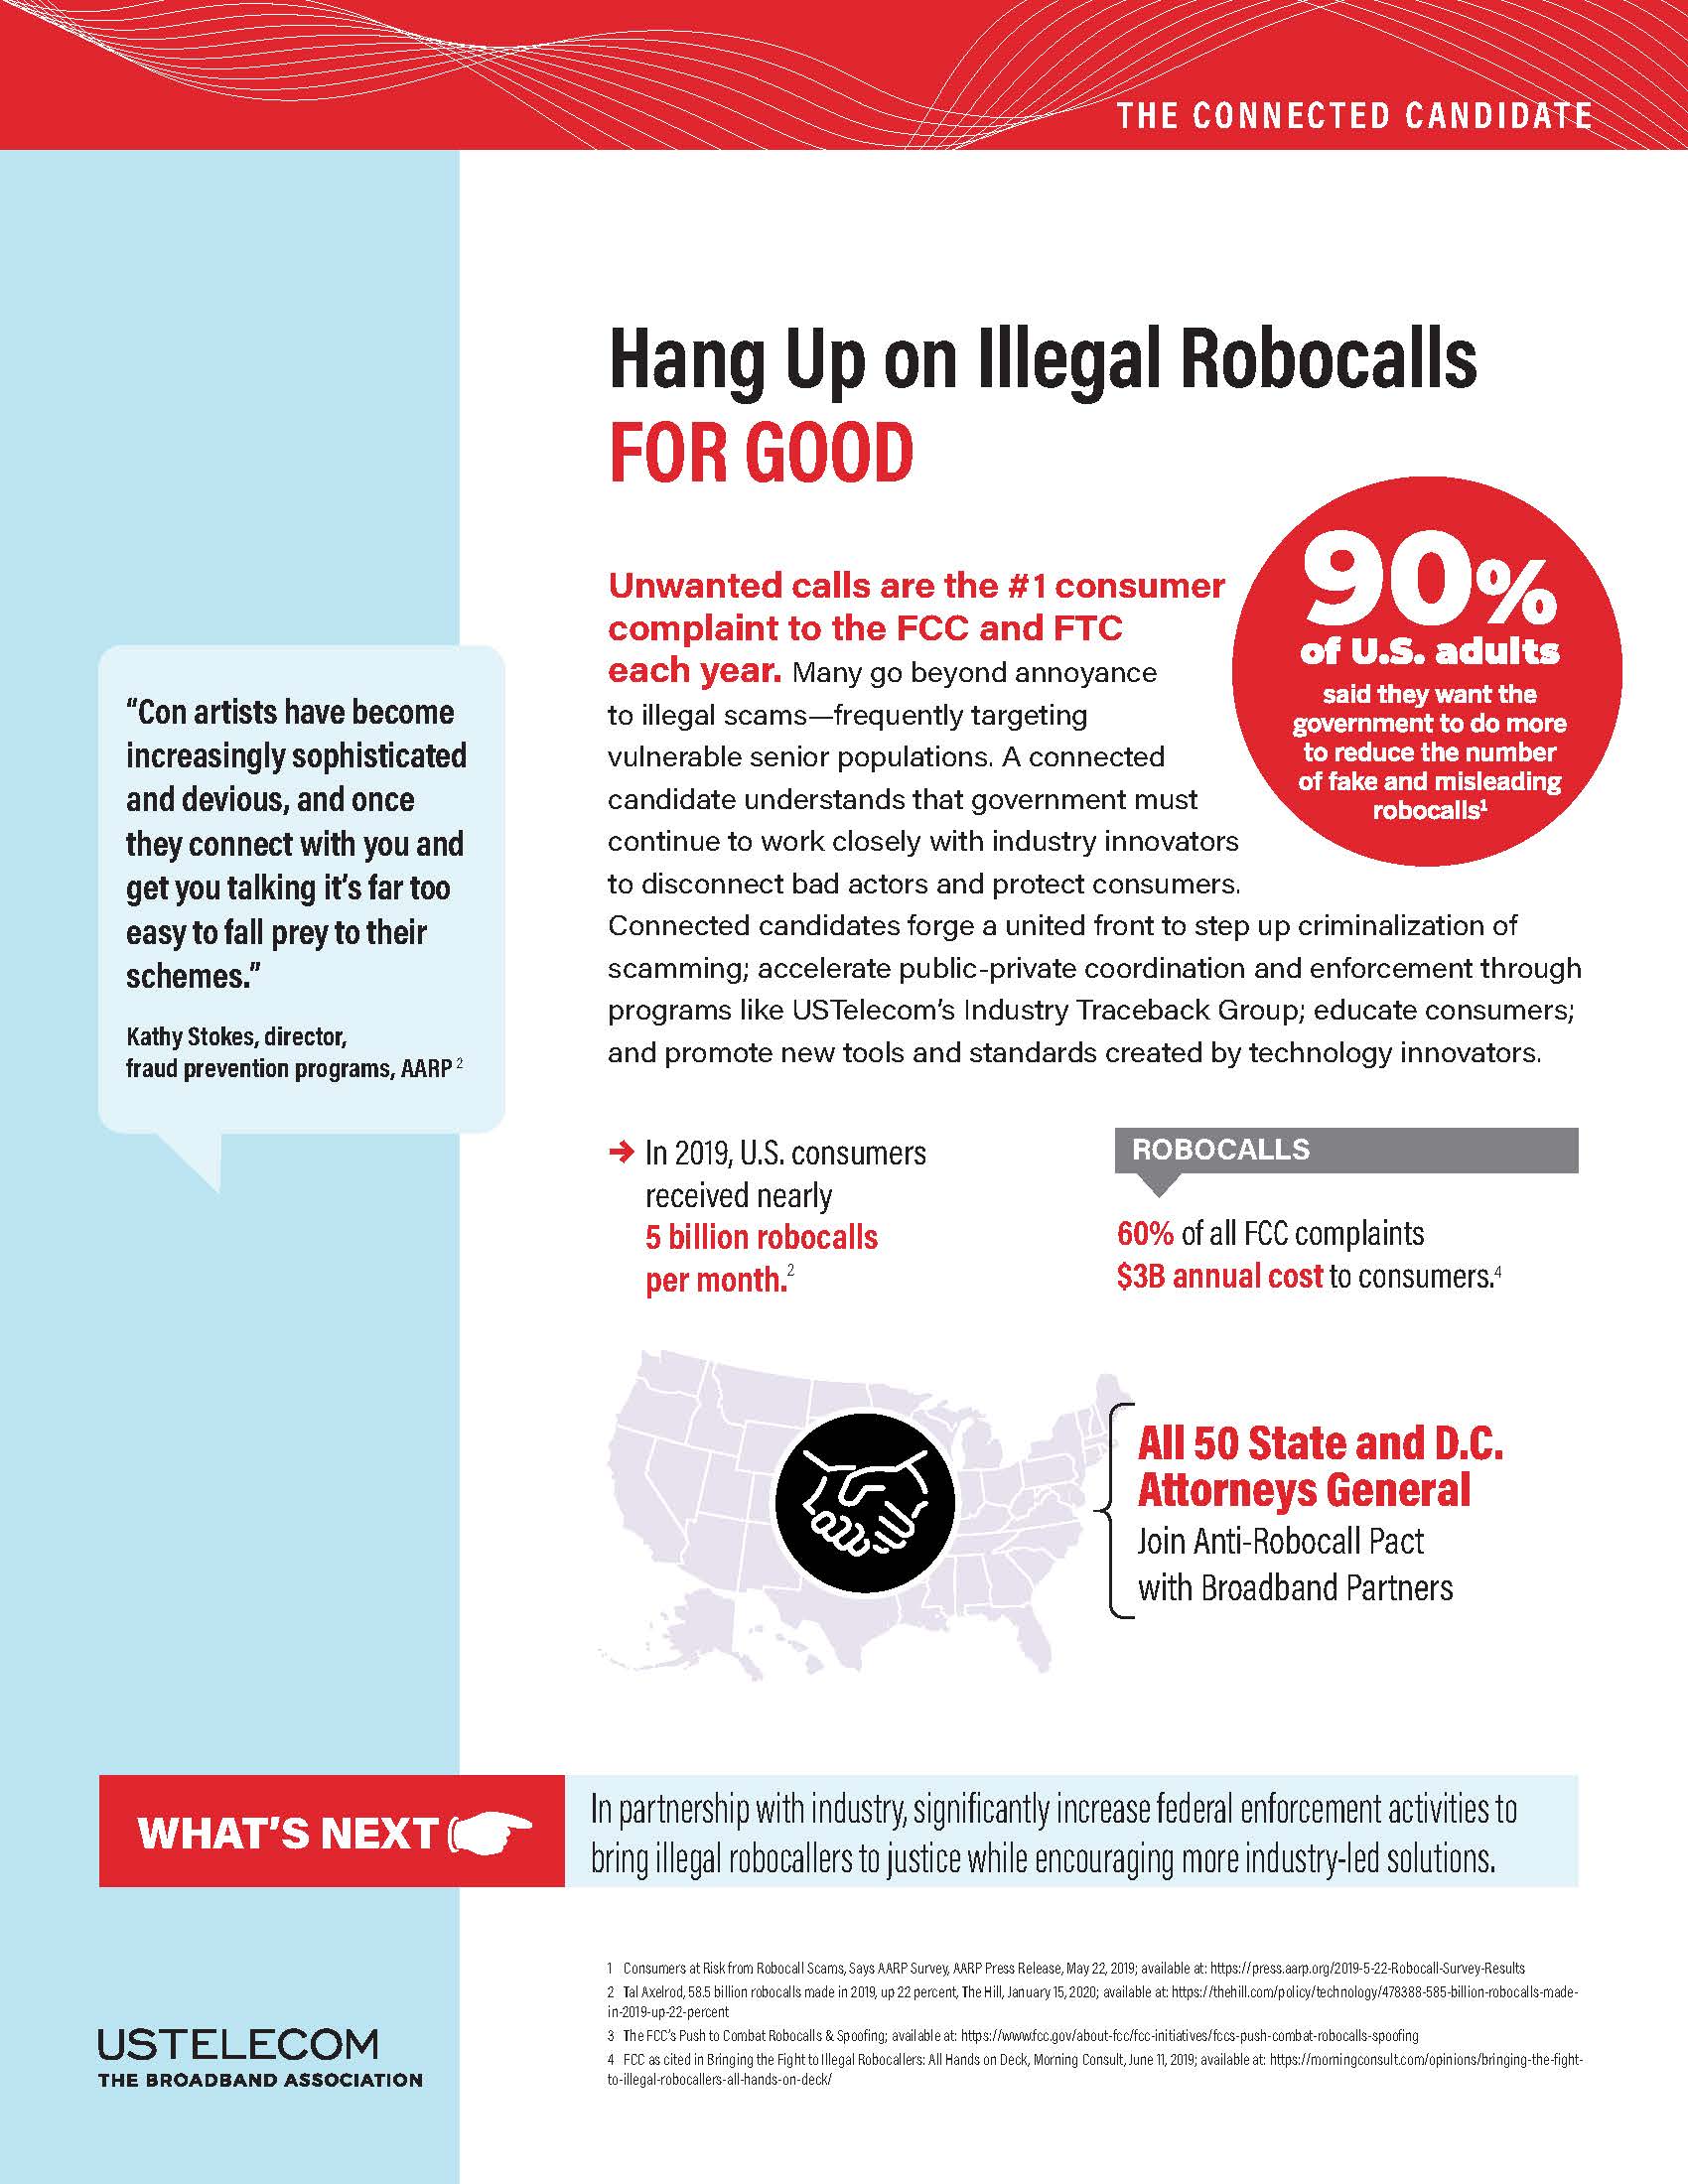 Roadmap To A Connected America: Hang Up on Illegal Robocalls for Good